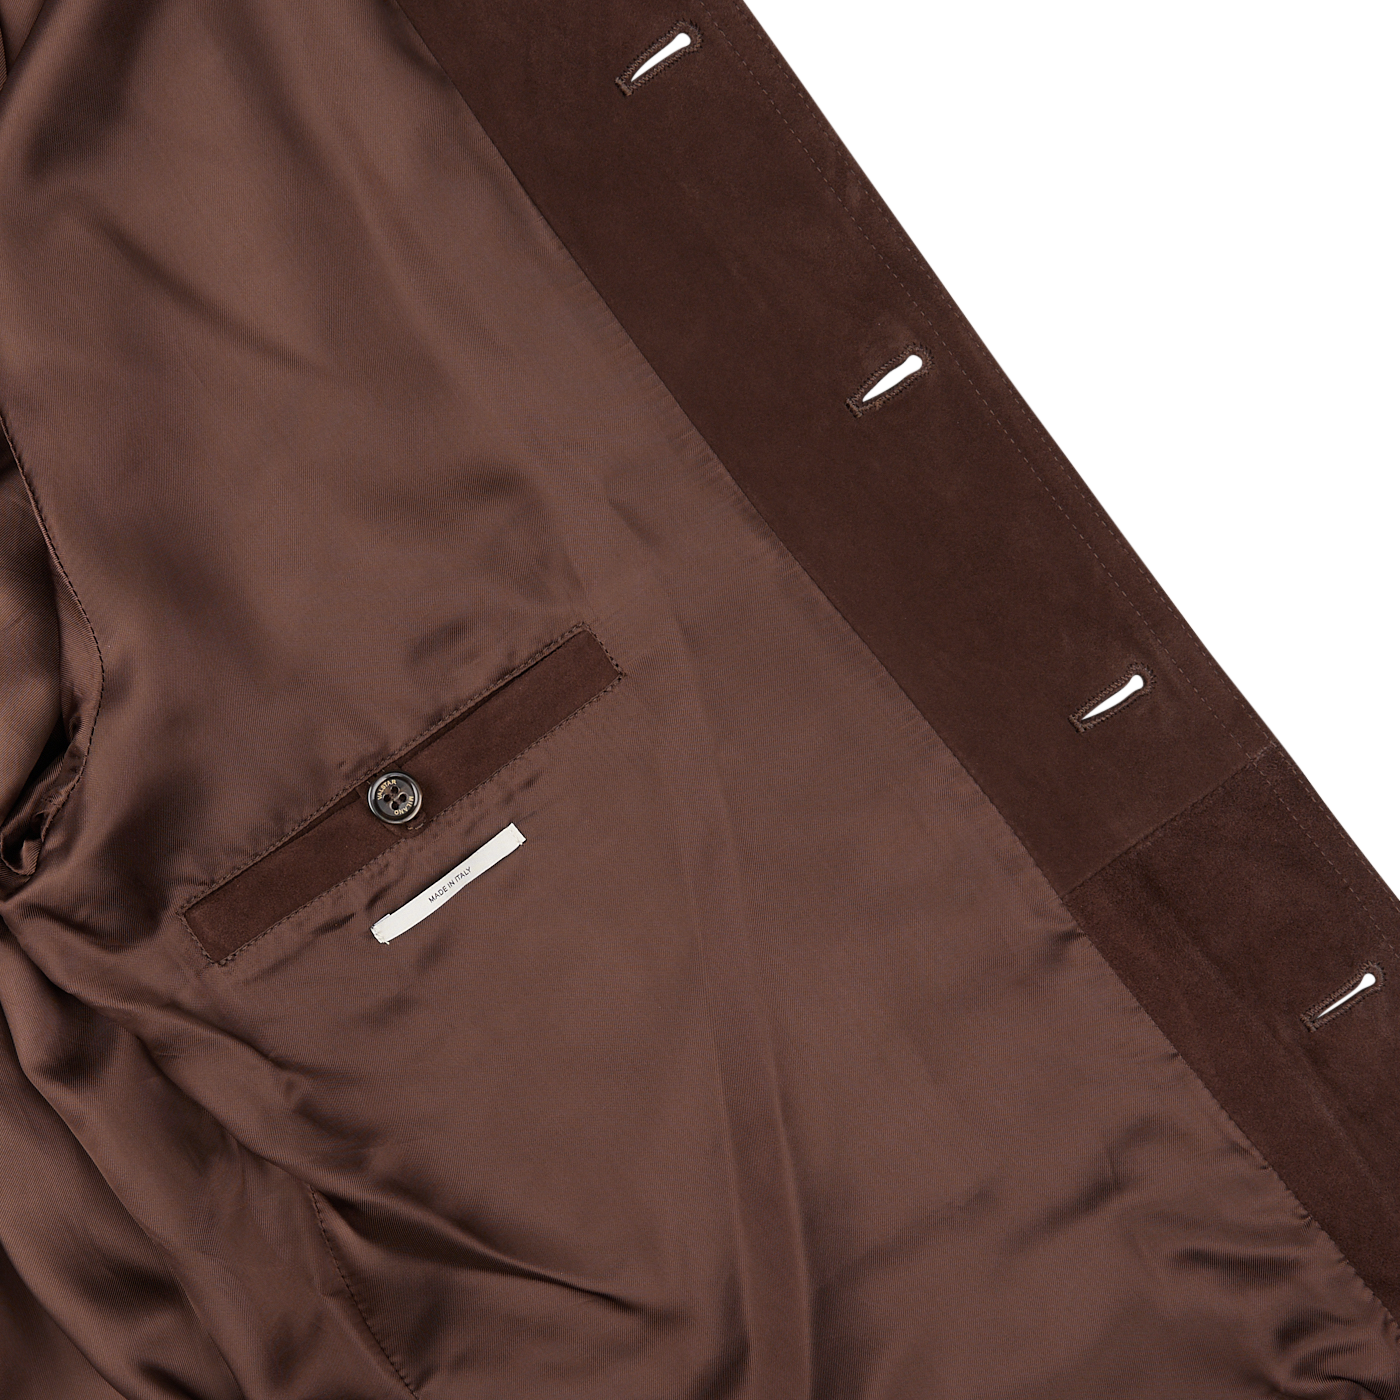 Dark Brown Suede Leather Valstarino Jacket with a buttoned waistband on a white background.